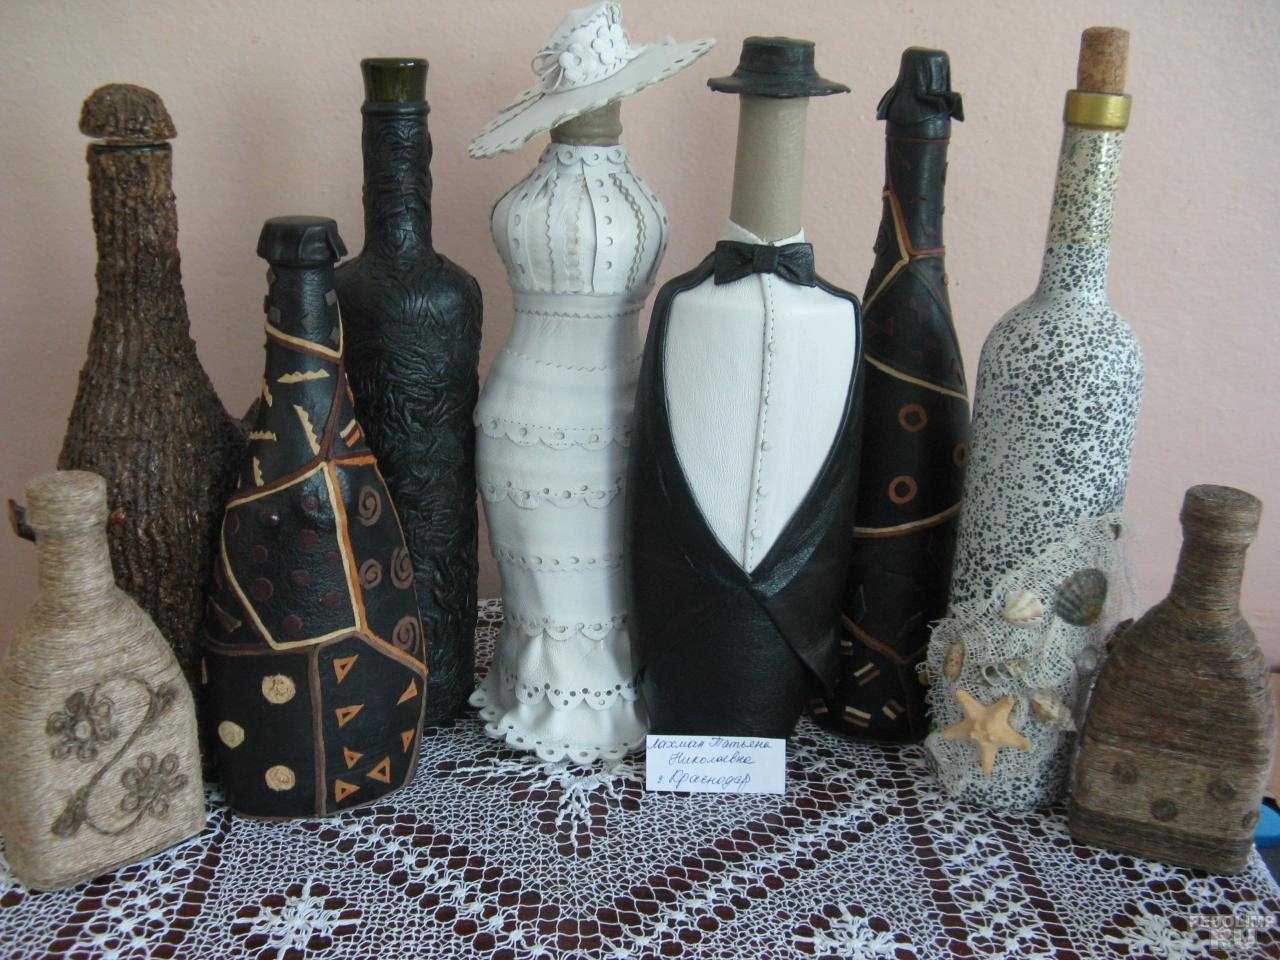 variant of chic decoration of champagne bottles with twine